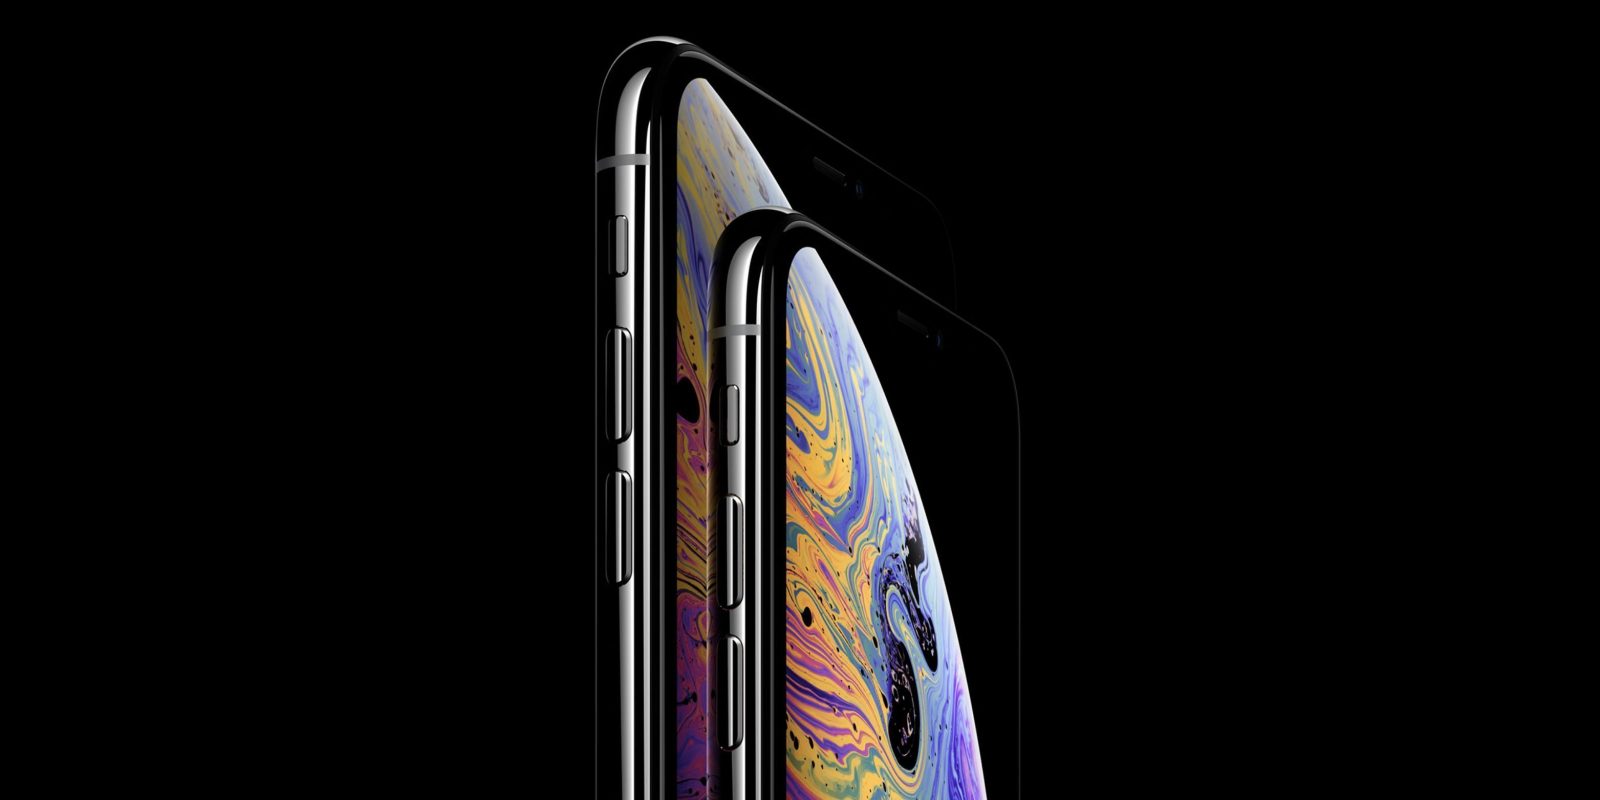 Kuo: All 2020 iPhone models will have 5G network